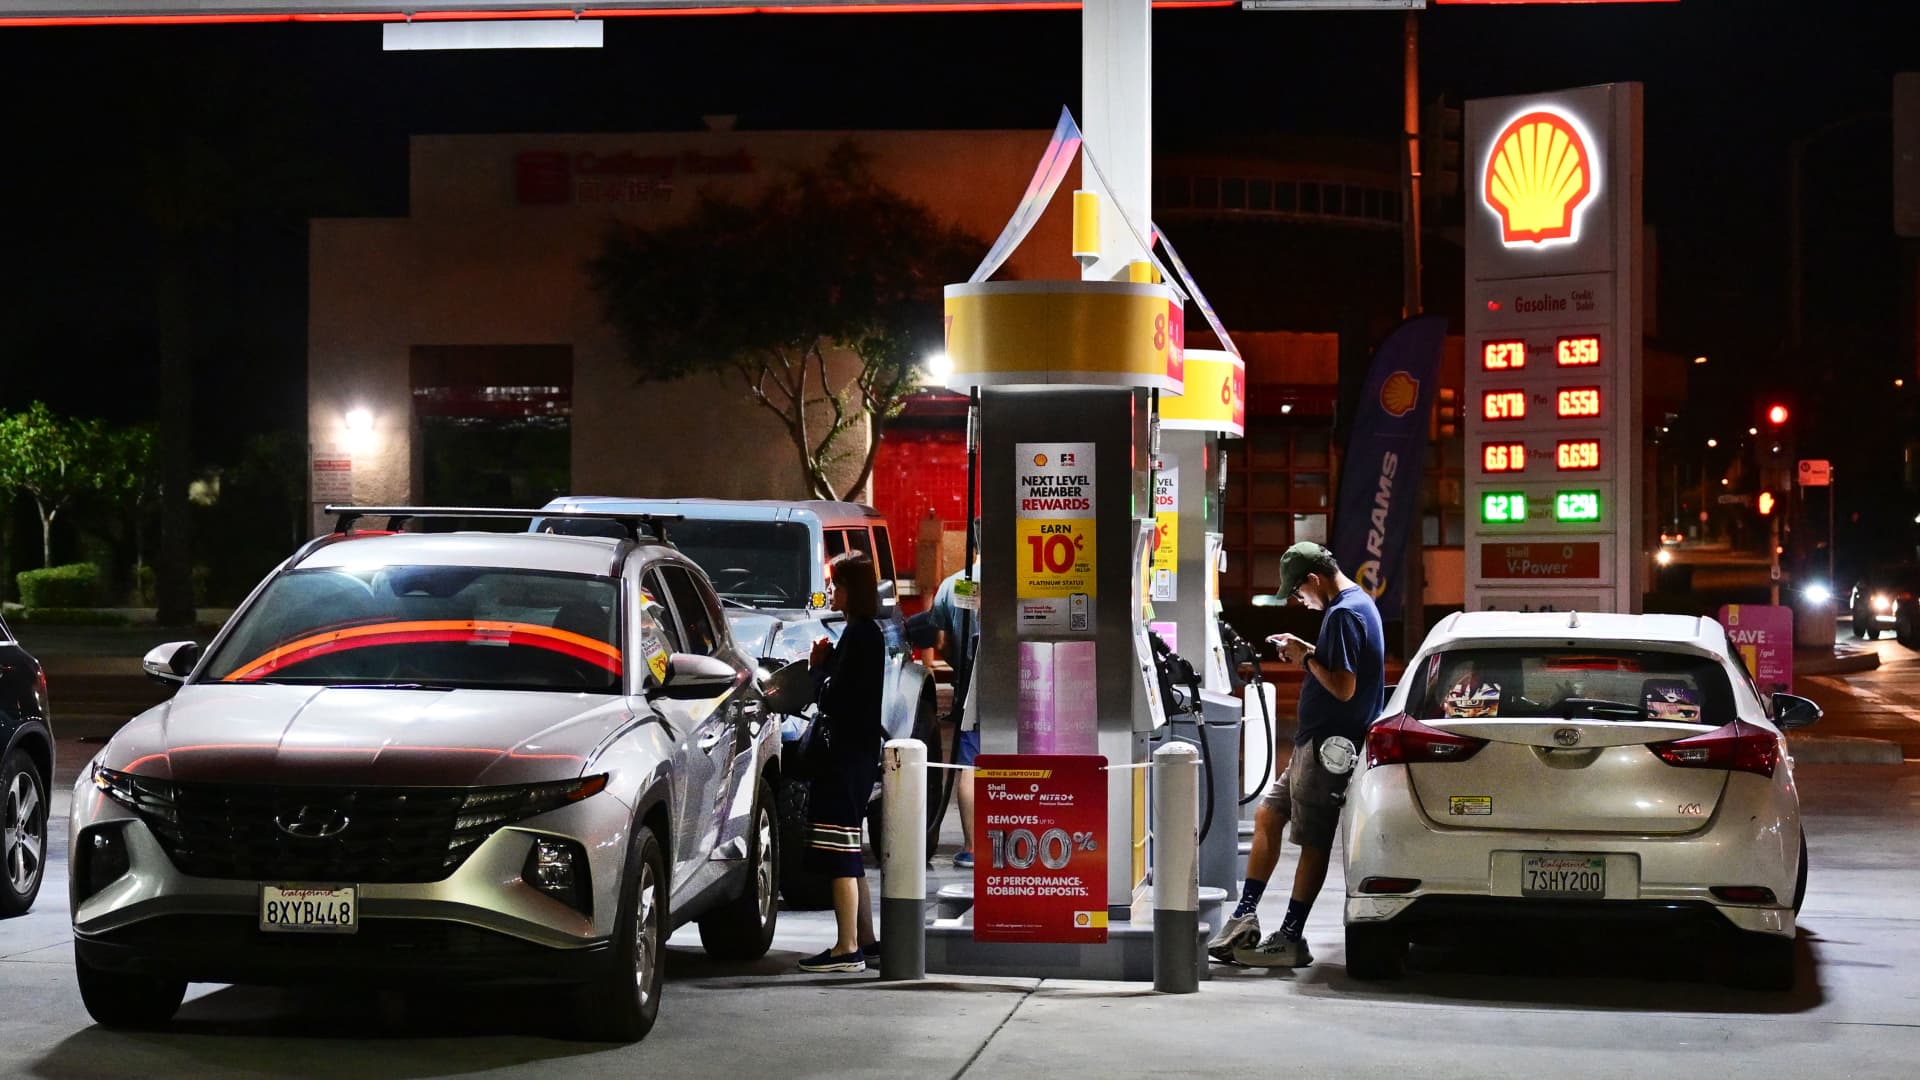 Israel-Hamas war causes oil prices to spike. Here's what drivers in the U.S. need to know